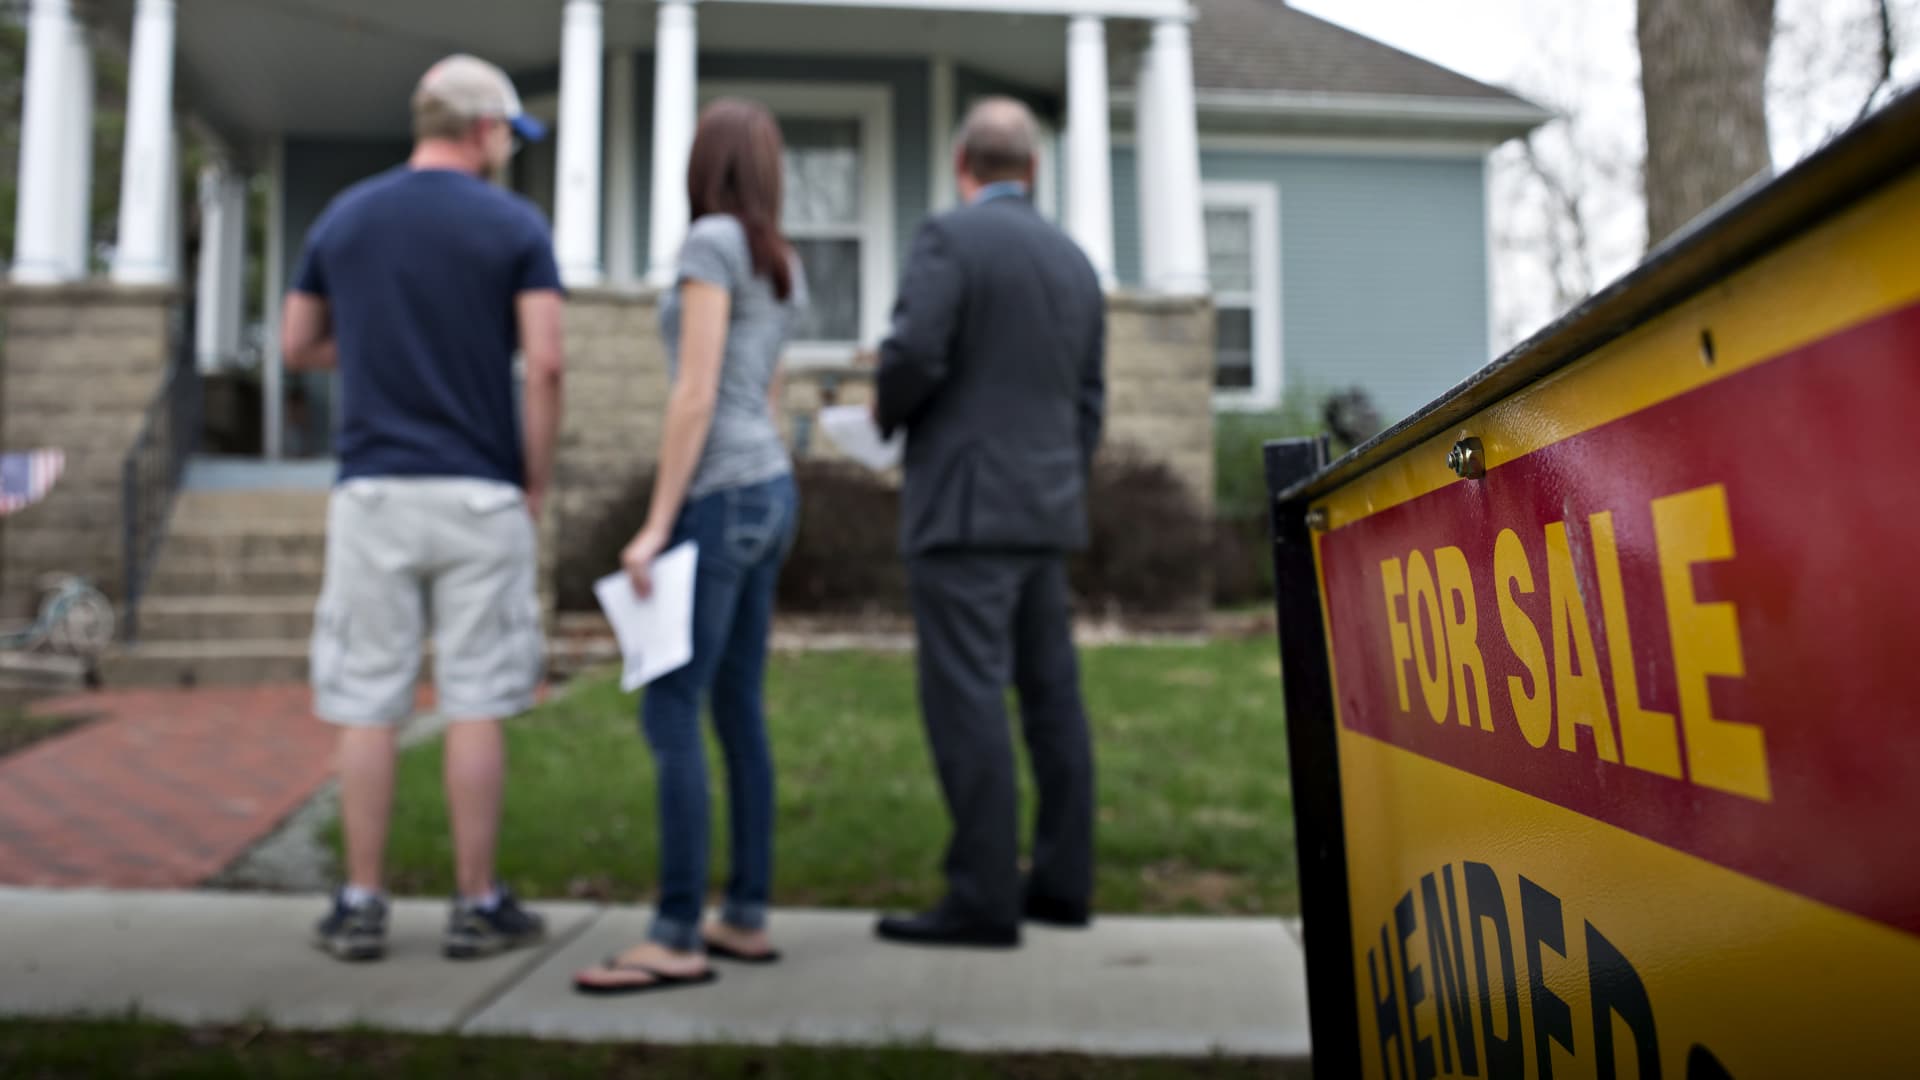 Jobs, home prices and market volatility are among clients' big concerns right now, advisors say